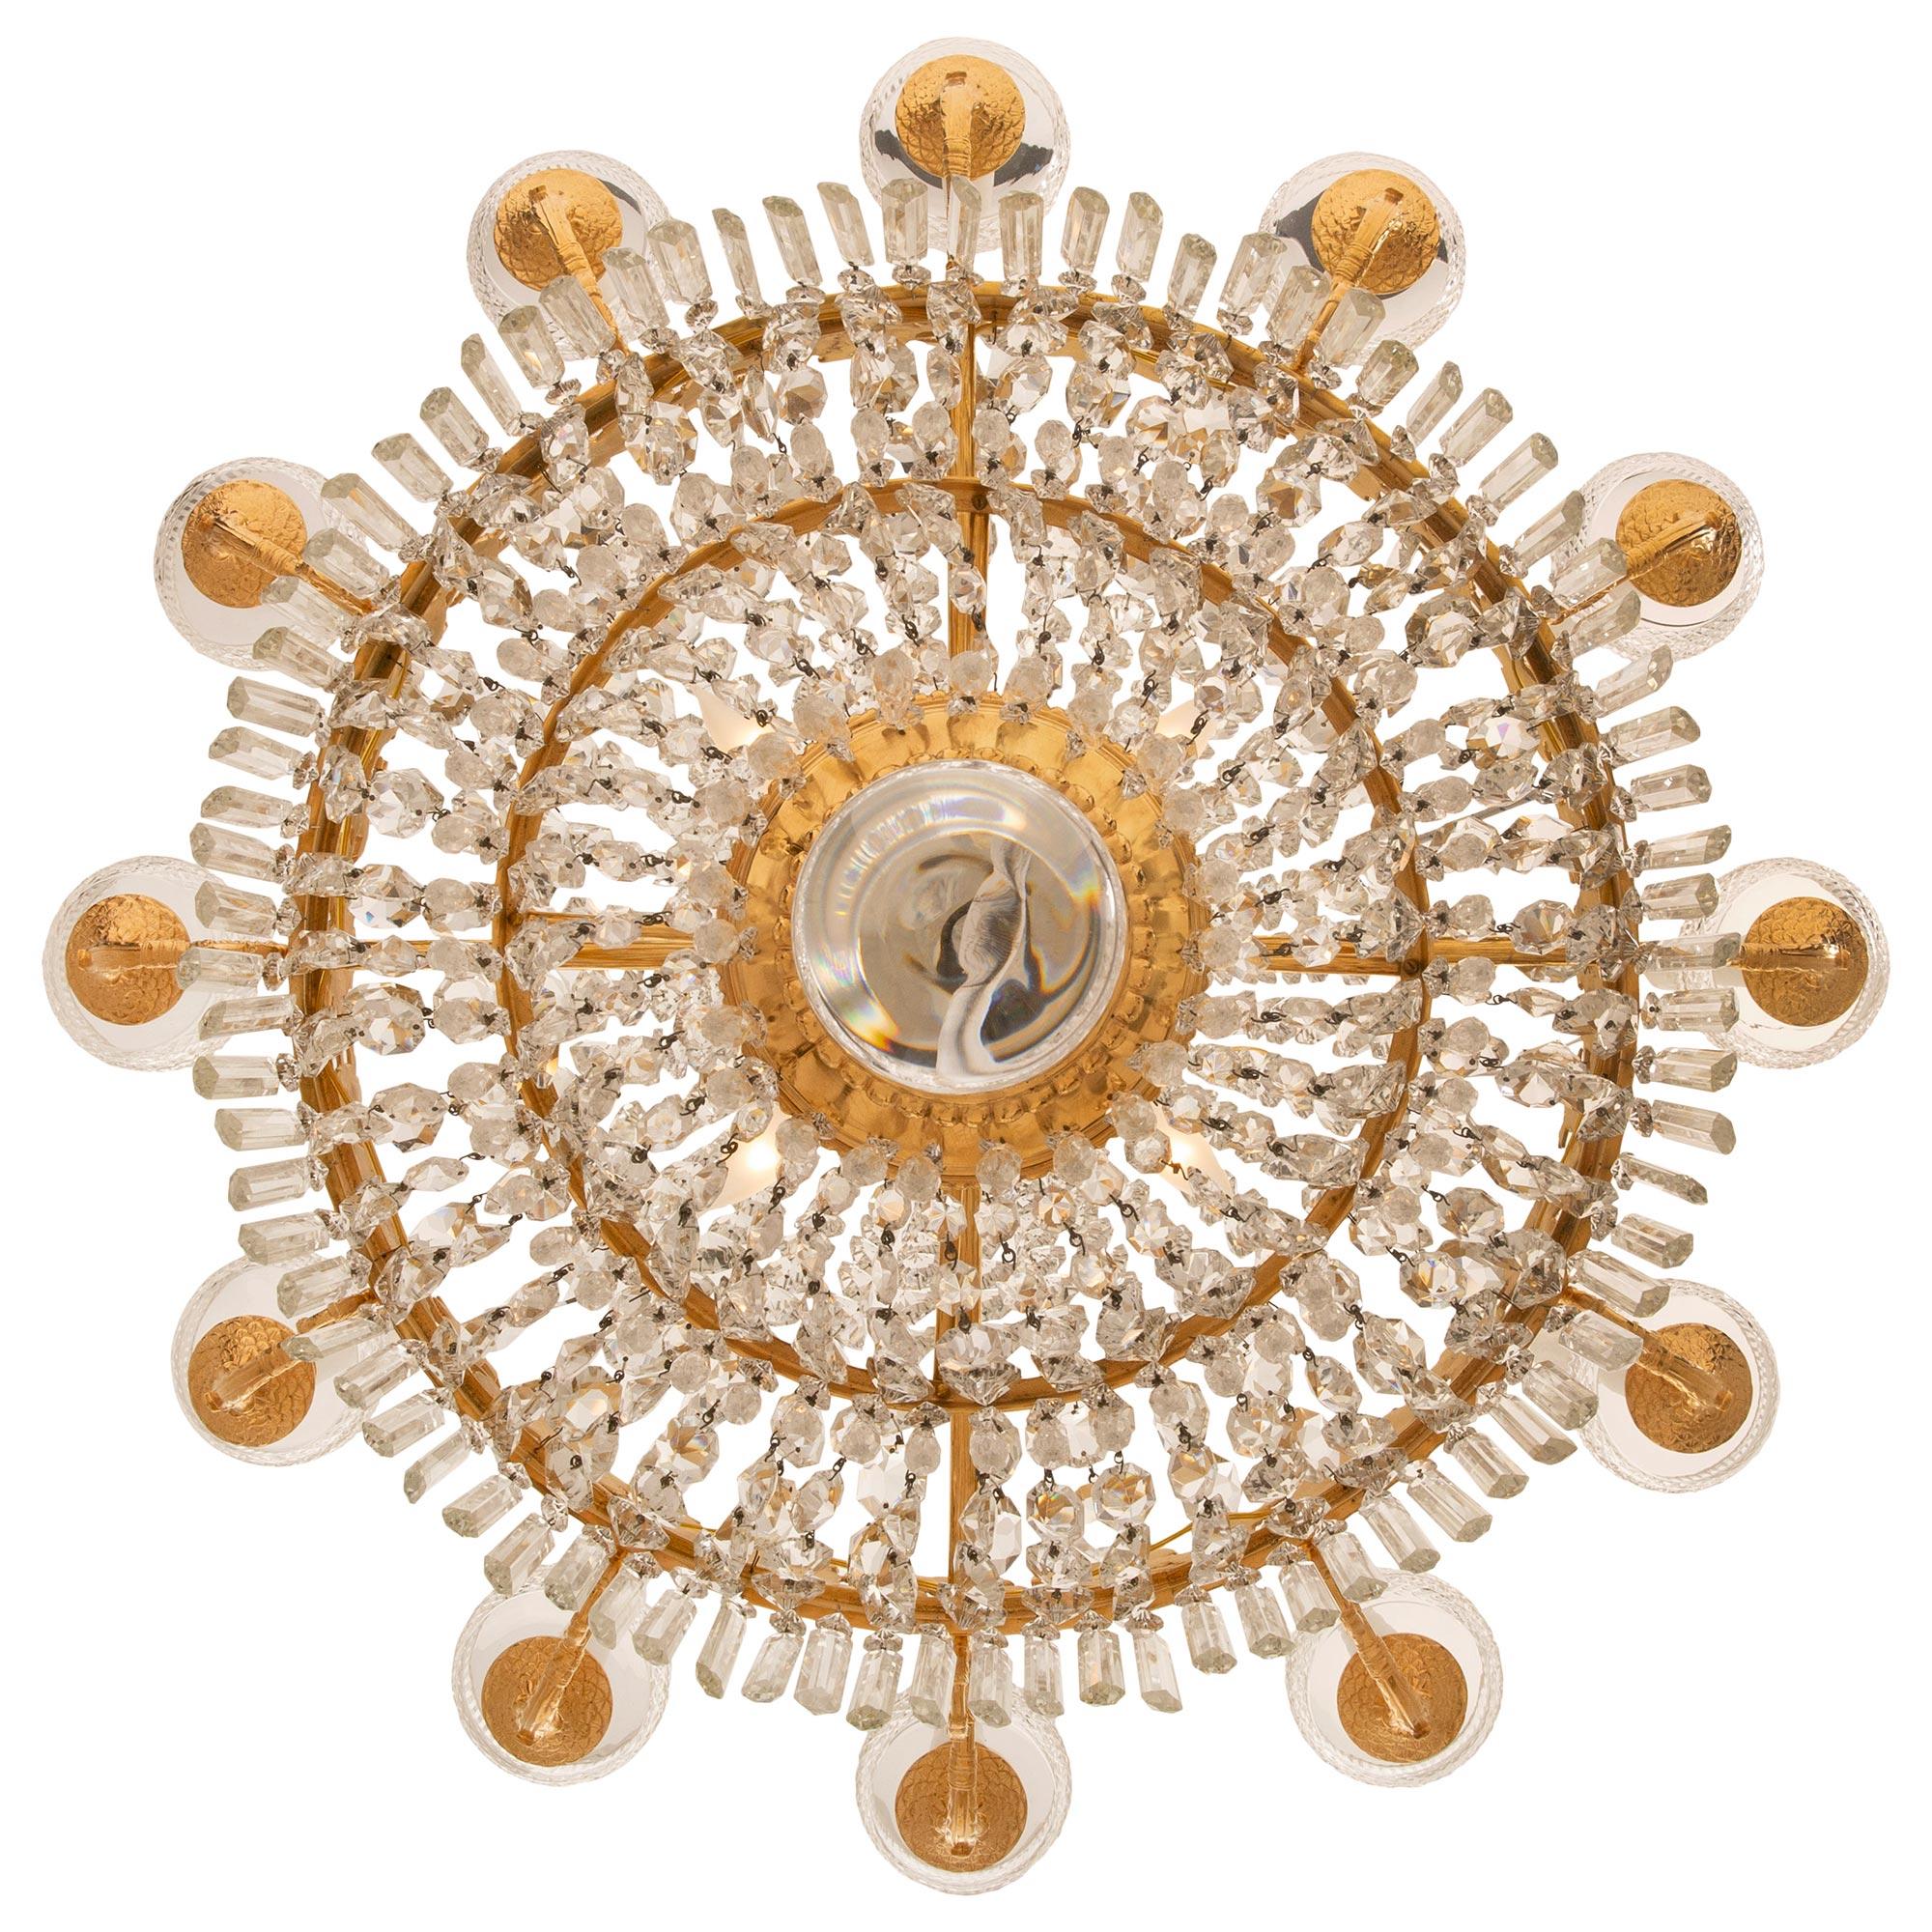 A beautiful and very high quality French 19th century Empire st. ormolu and Baccarat crystal chandelier. The twelve arm sixteen light chandelier is centered by a striking solid crystal ball below the lovely mottled foliate ormolu support with three